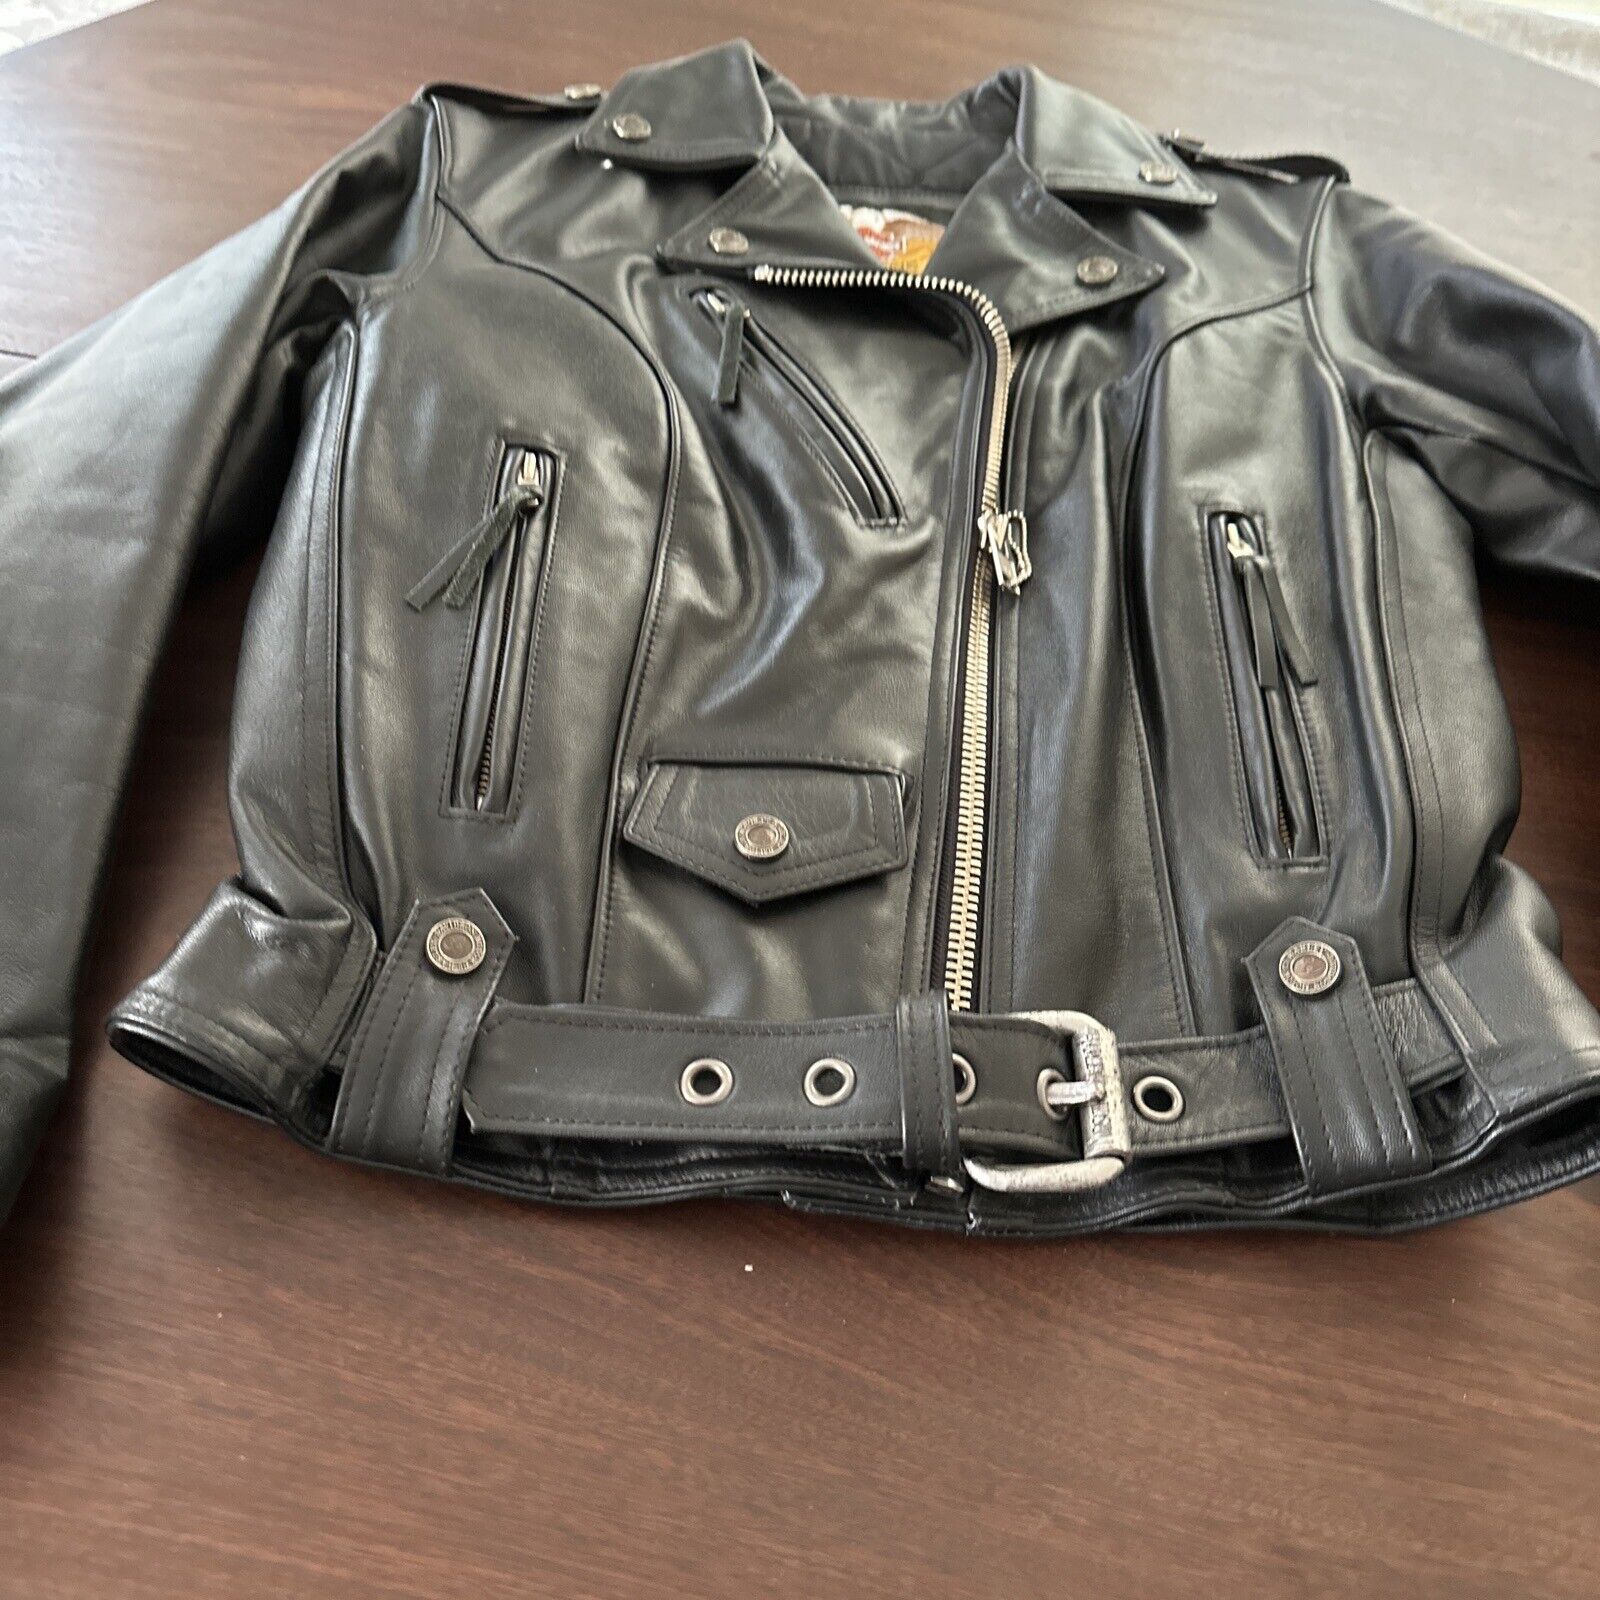 VTG Harley Davidson Women's Black Leather Riding Jacket Made In USA Size Small